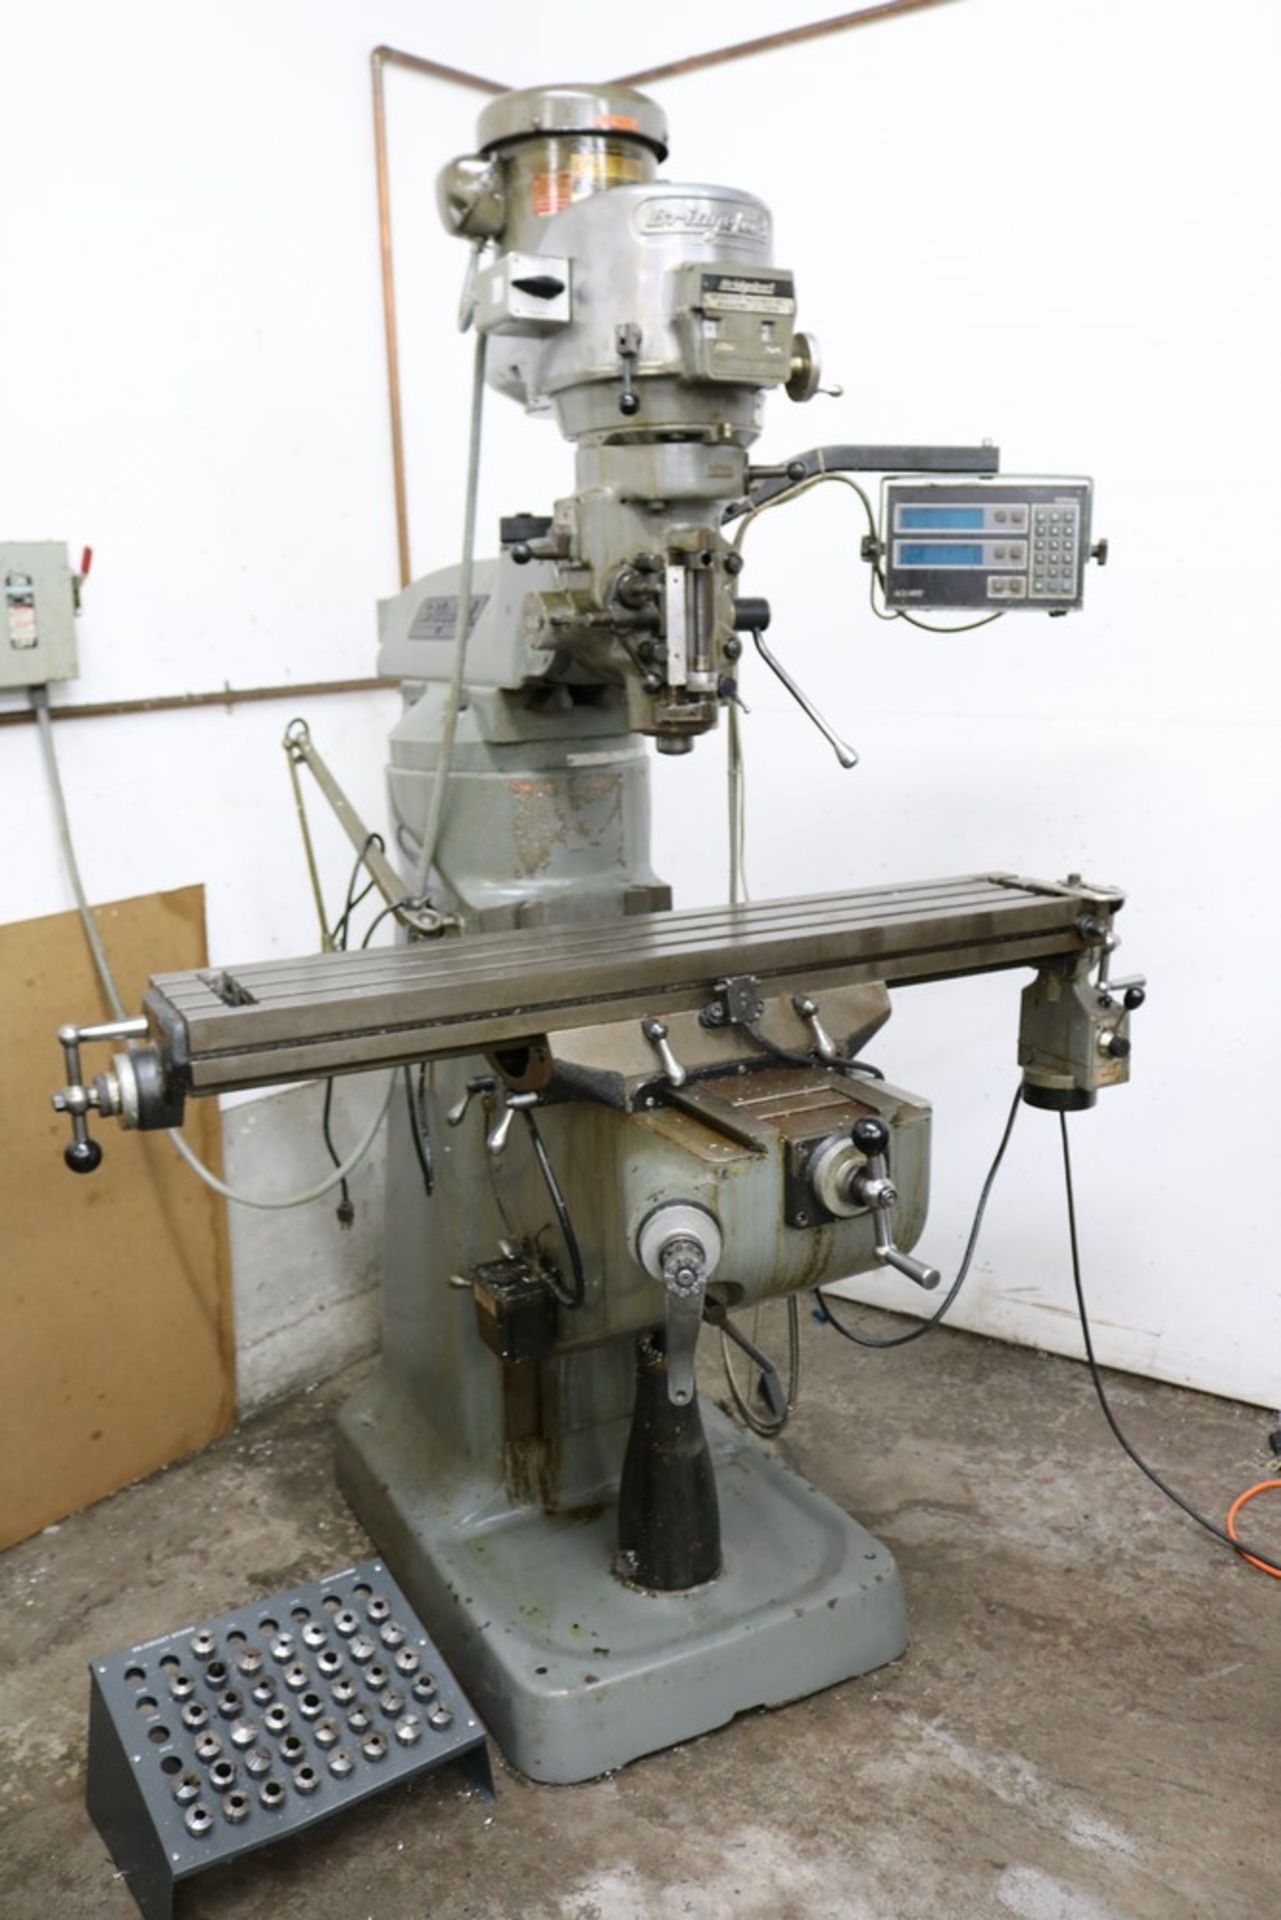 Bridgeport Knee Mill 2 HP with X Axis Servo and Acu-Rite Mill Mate DRO, 19" x 48" Table, Includes R8